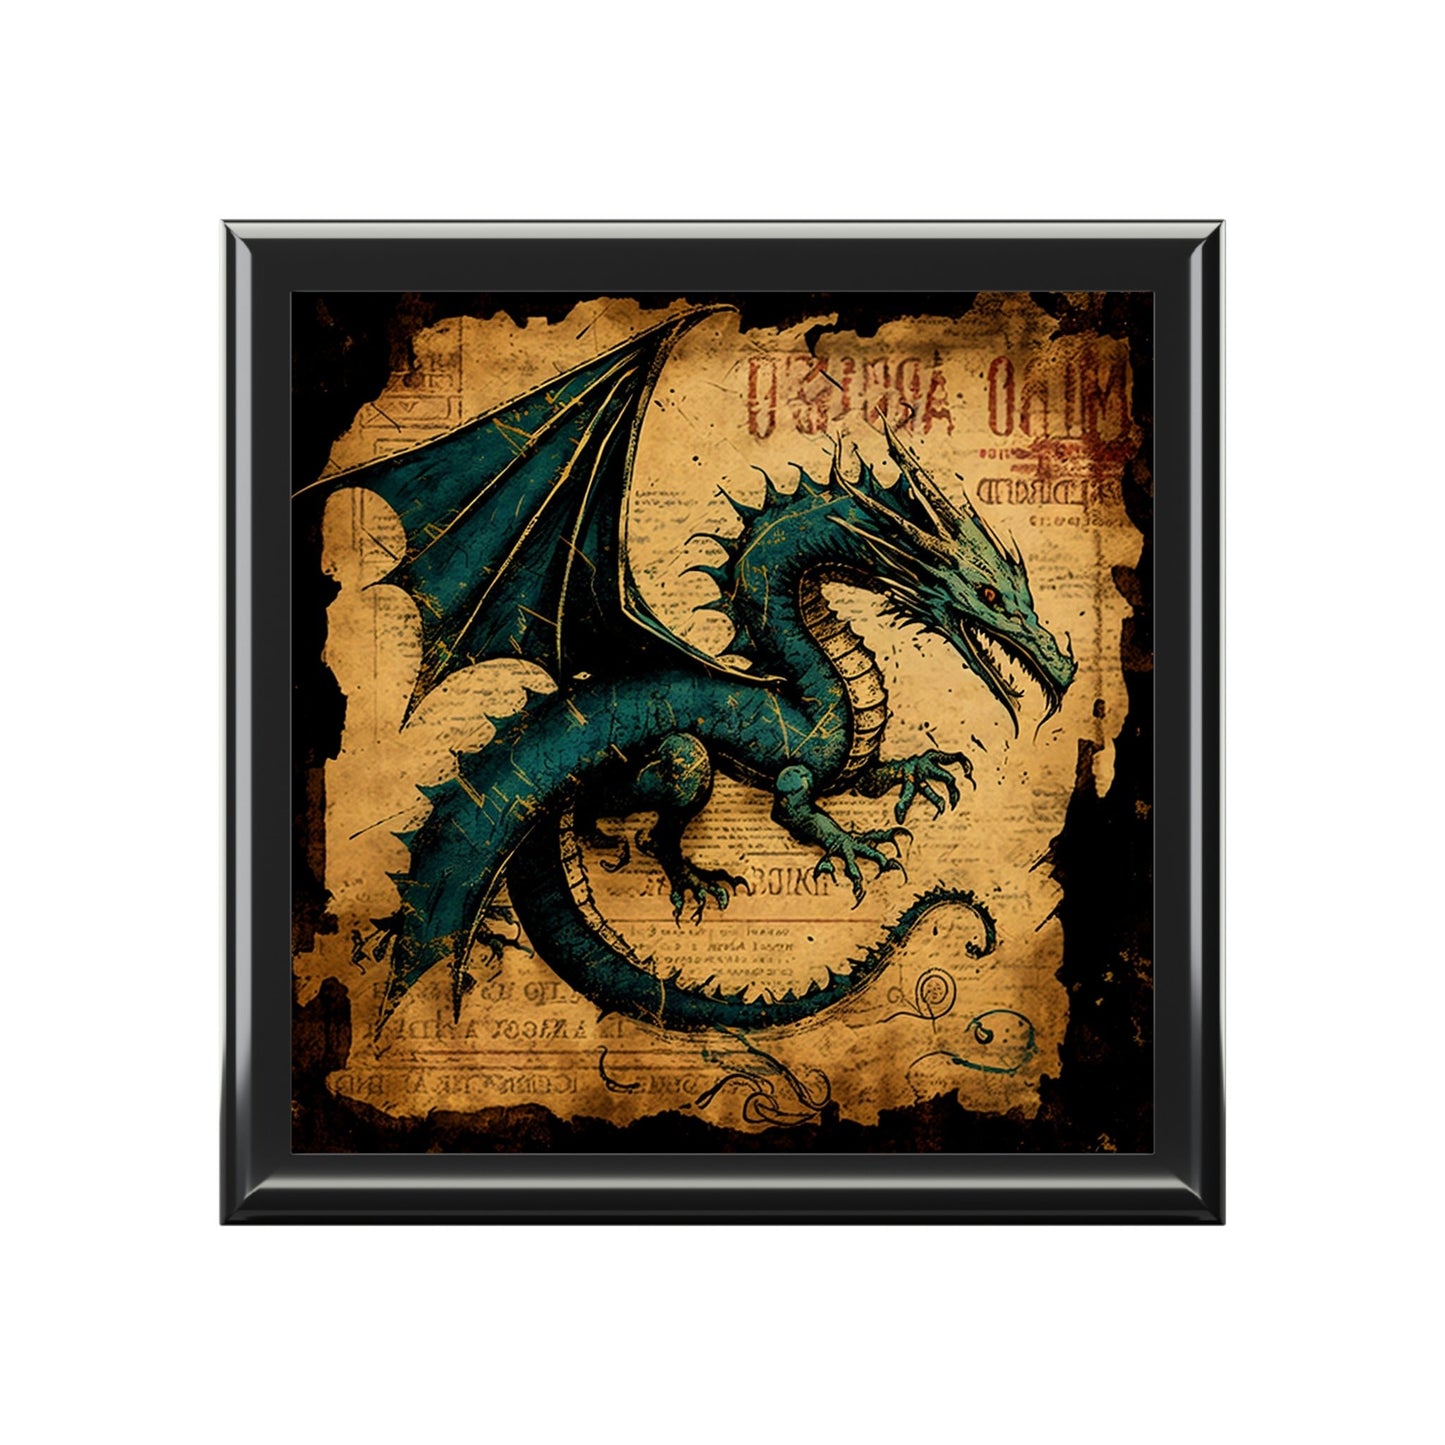 Vintage Dragon Wooden Keepsake Jewelry Box with Ceramic Tile Cover